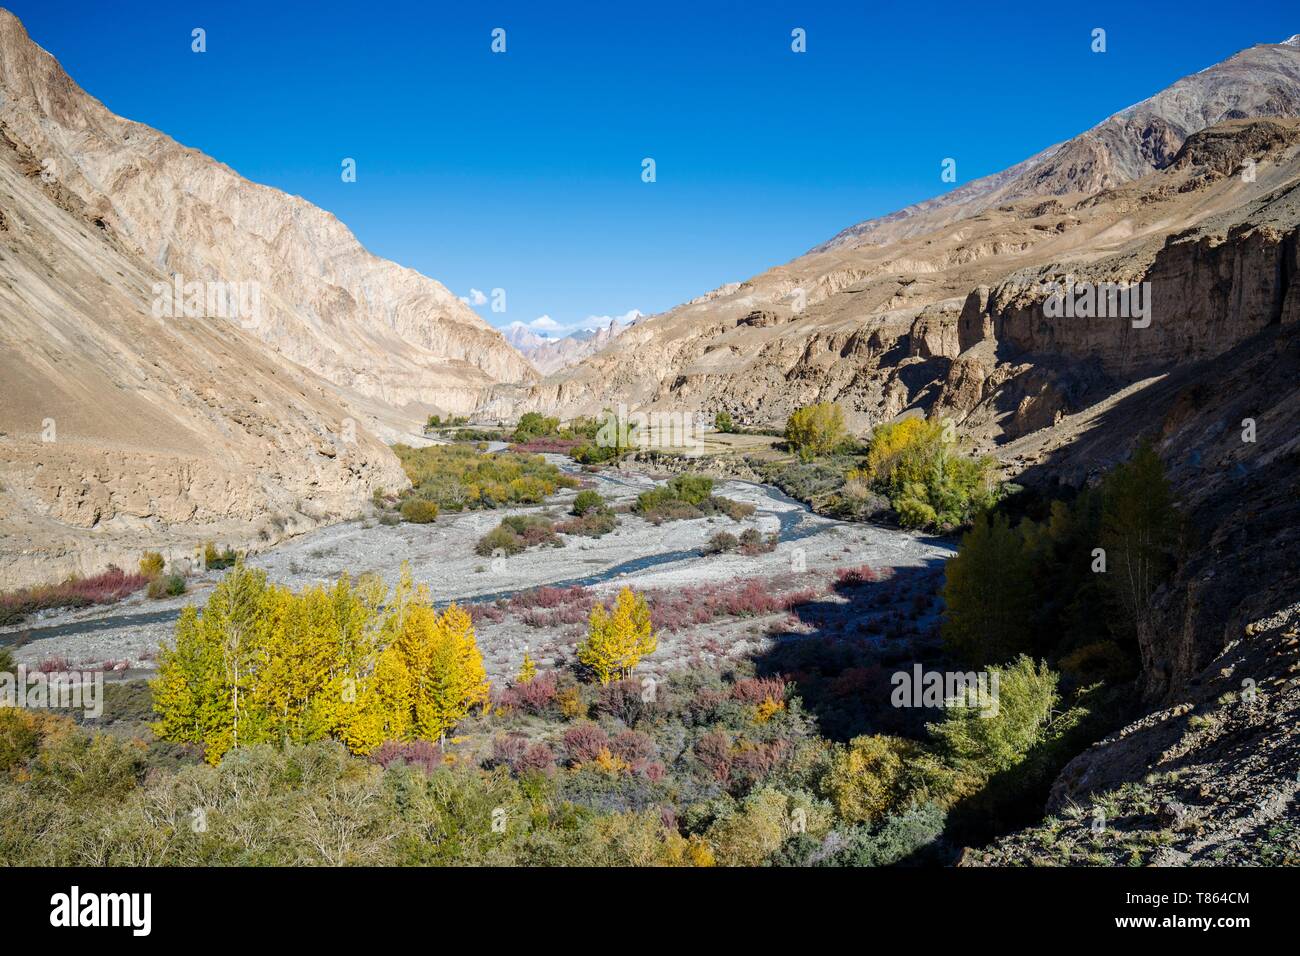 India, state of Jammu and Kashmir, Himalaya, Ladakh, Hemis National Park, trekking from Chilling to Chogdo in the Markha valley, Stock Photo